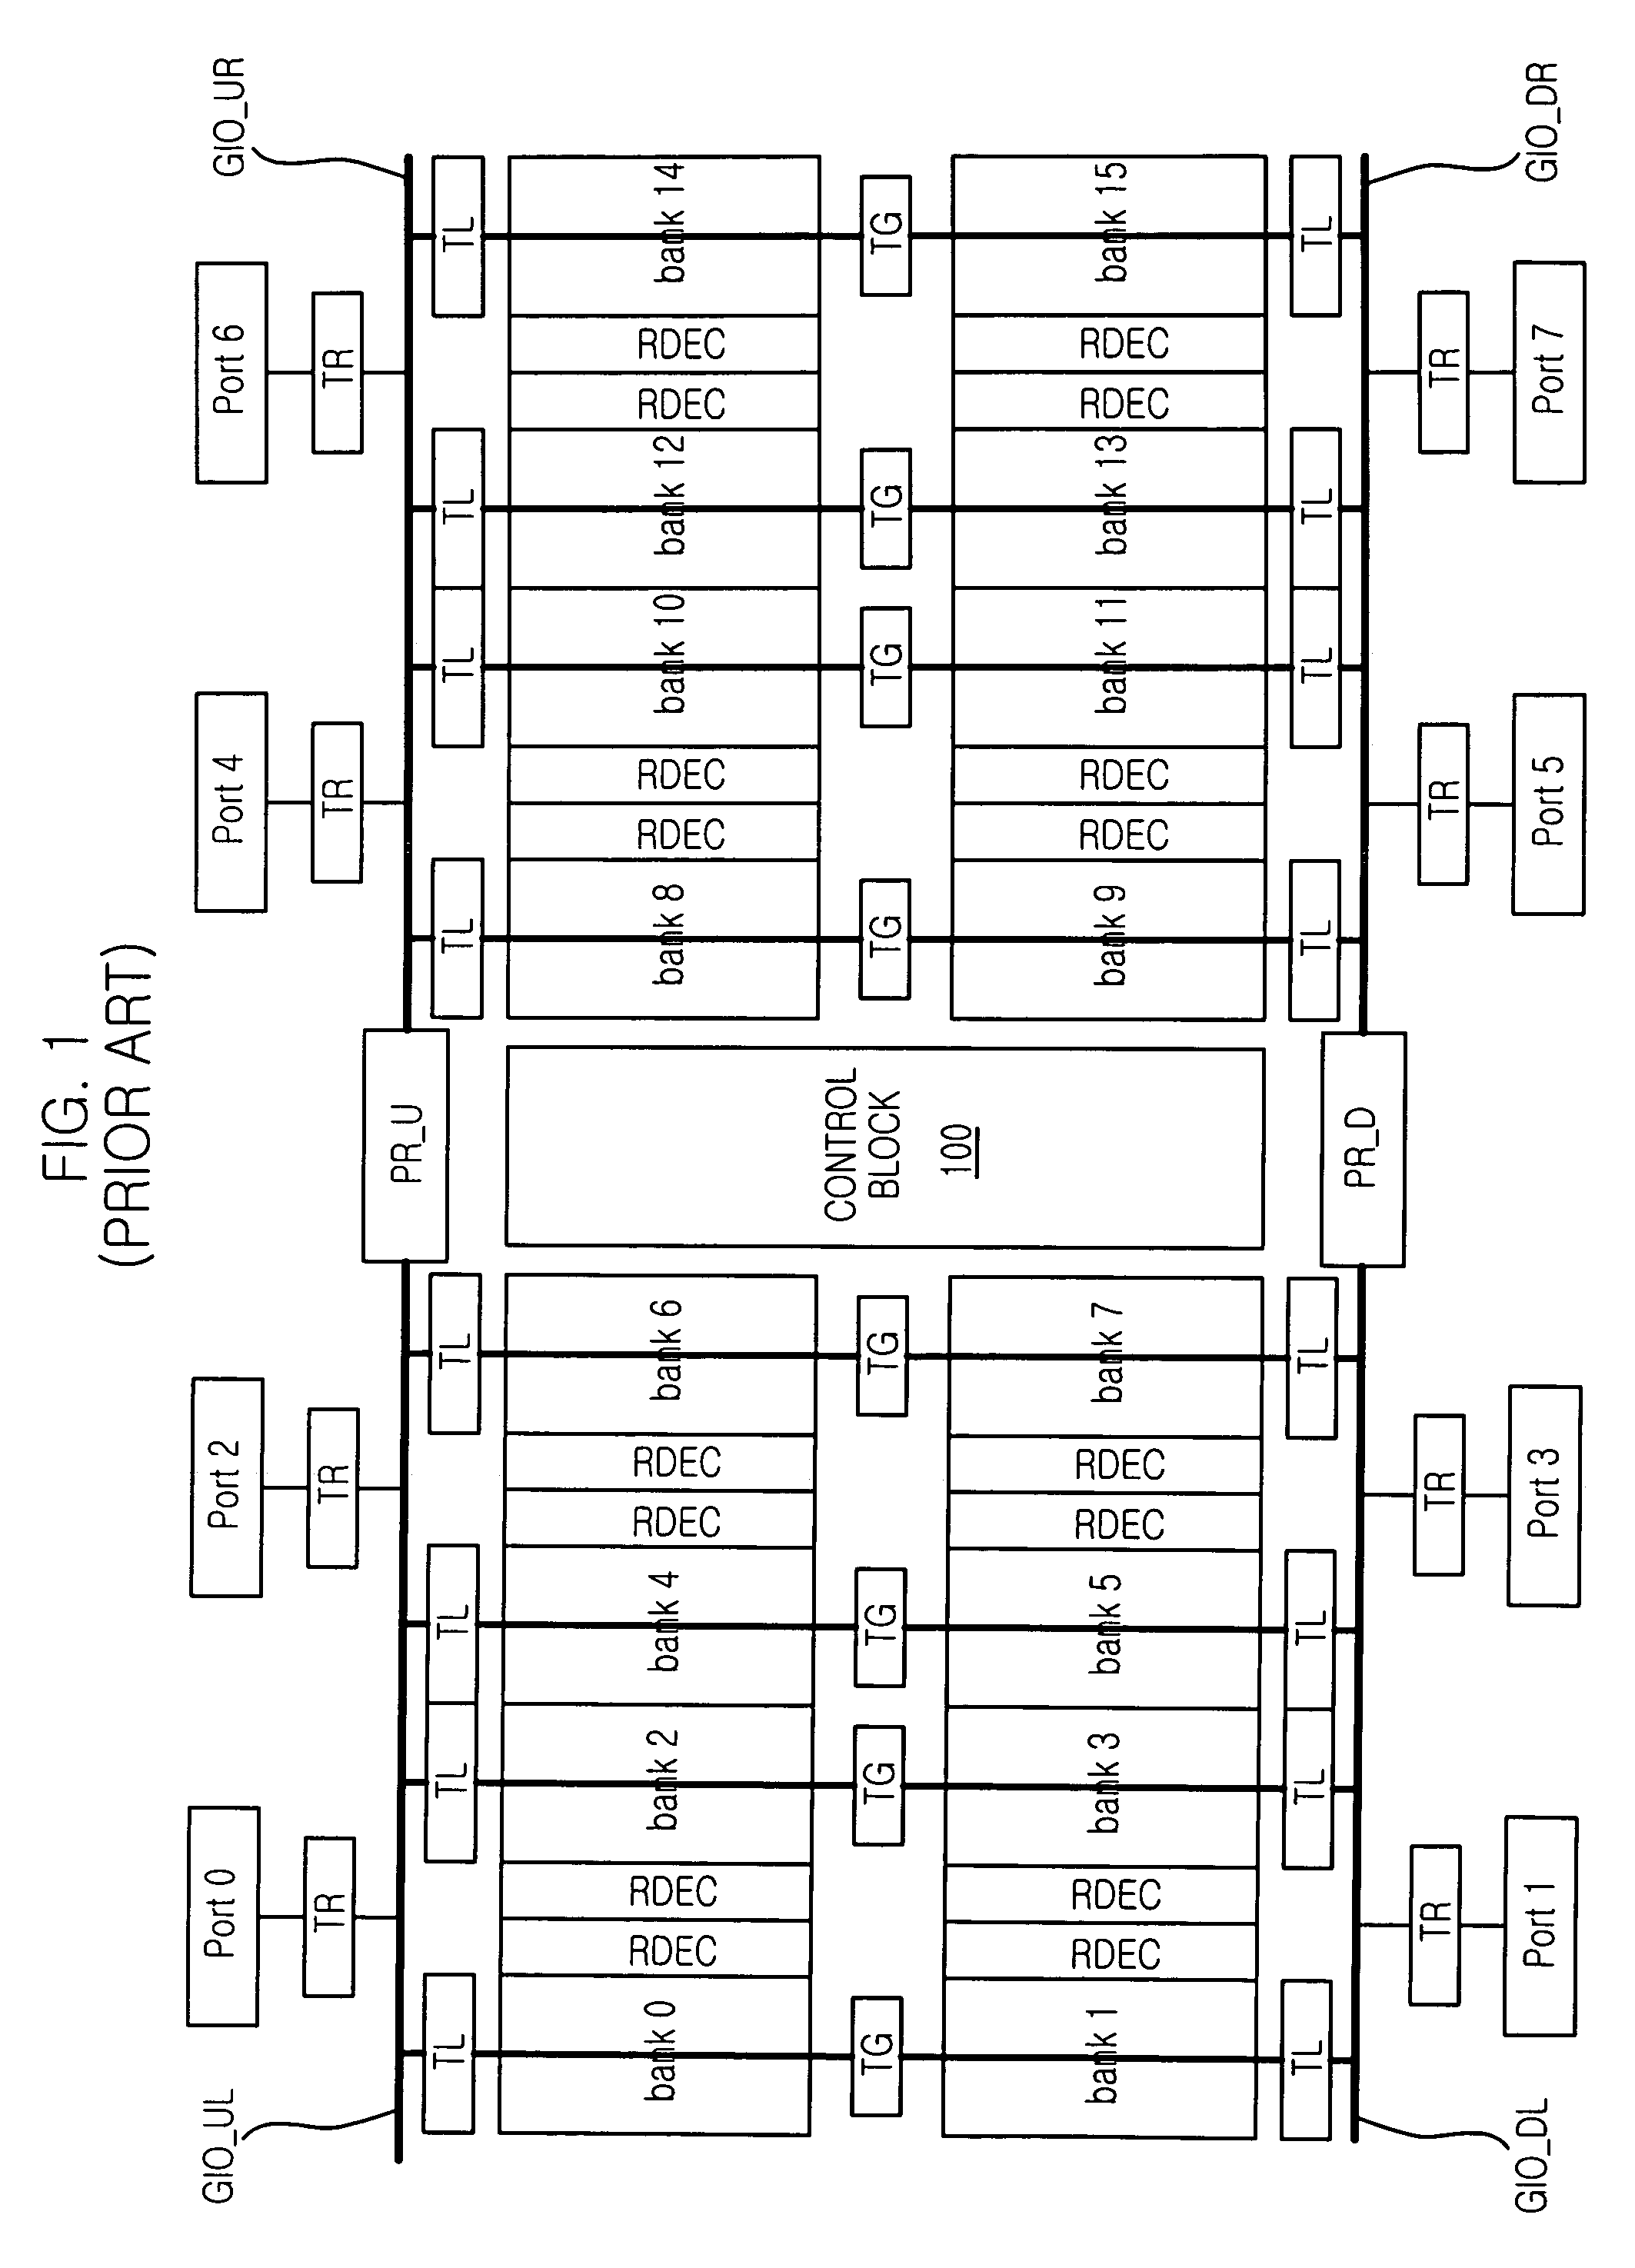 Bus connection circuit for read operation of multi-port memory device